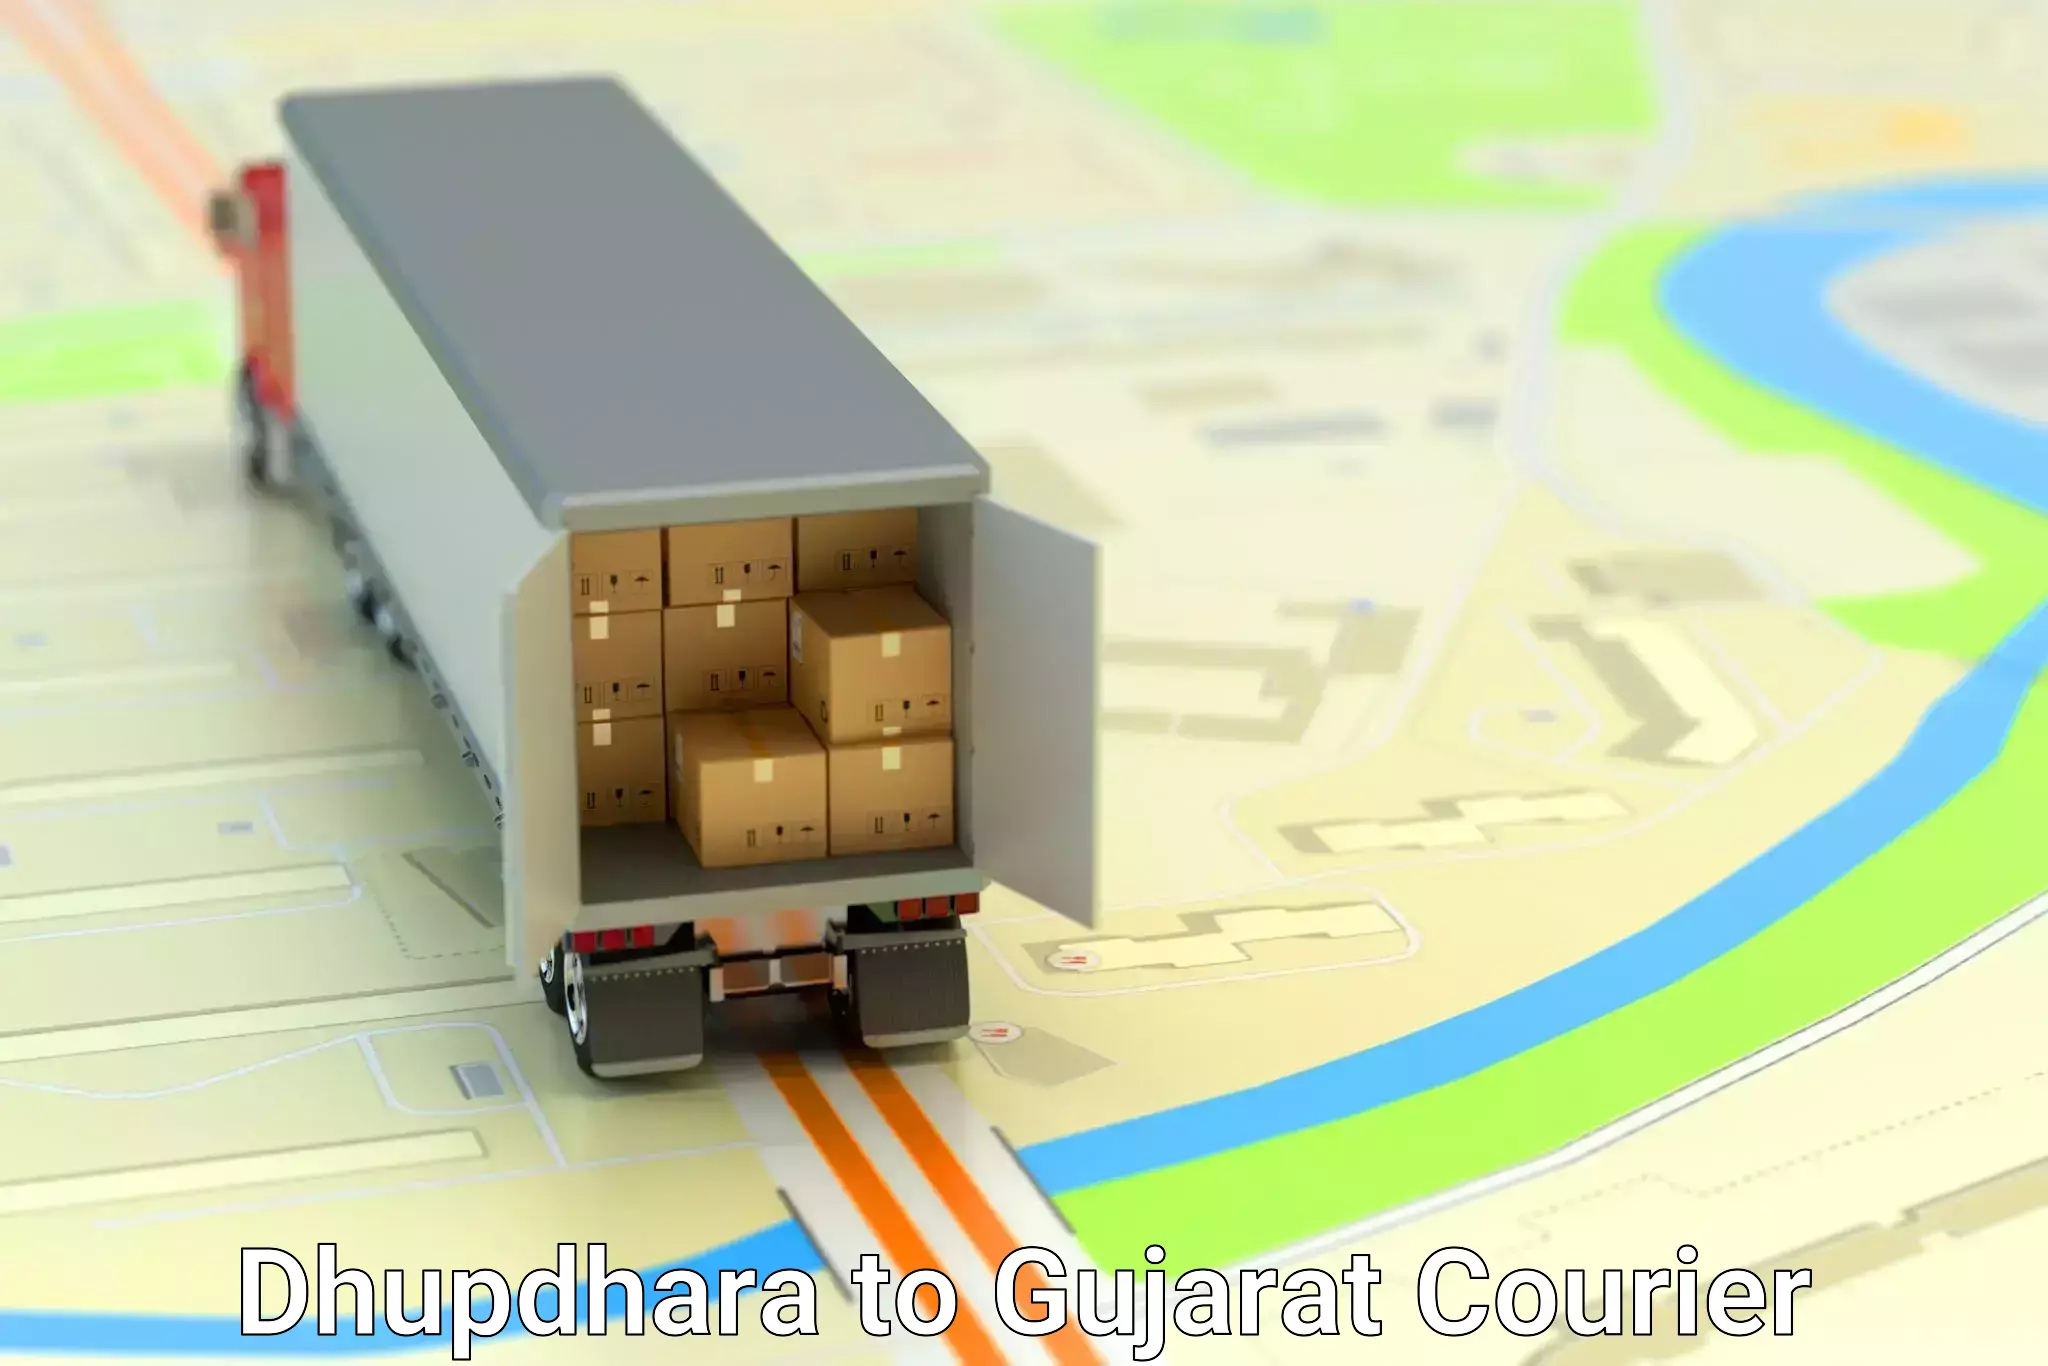 Supply chain delivery in Dhupdhara to Gujarat